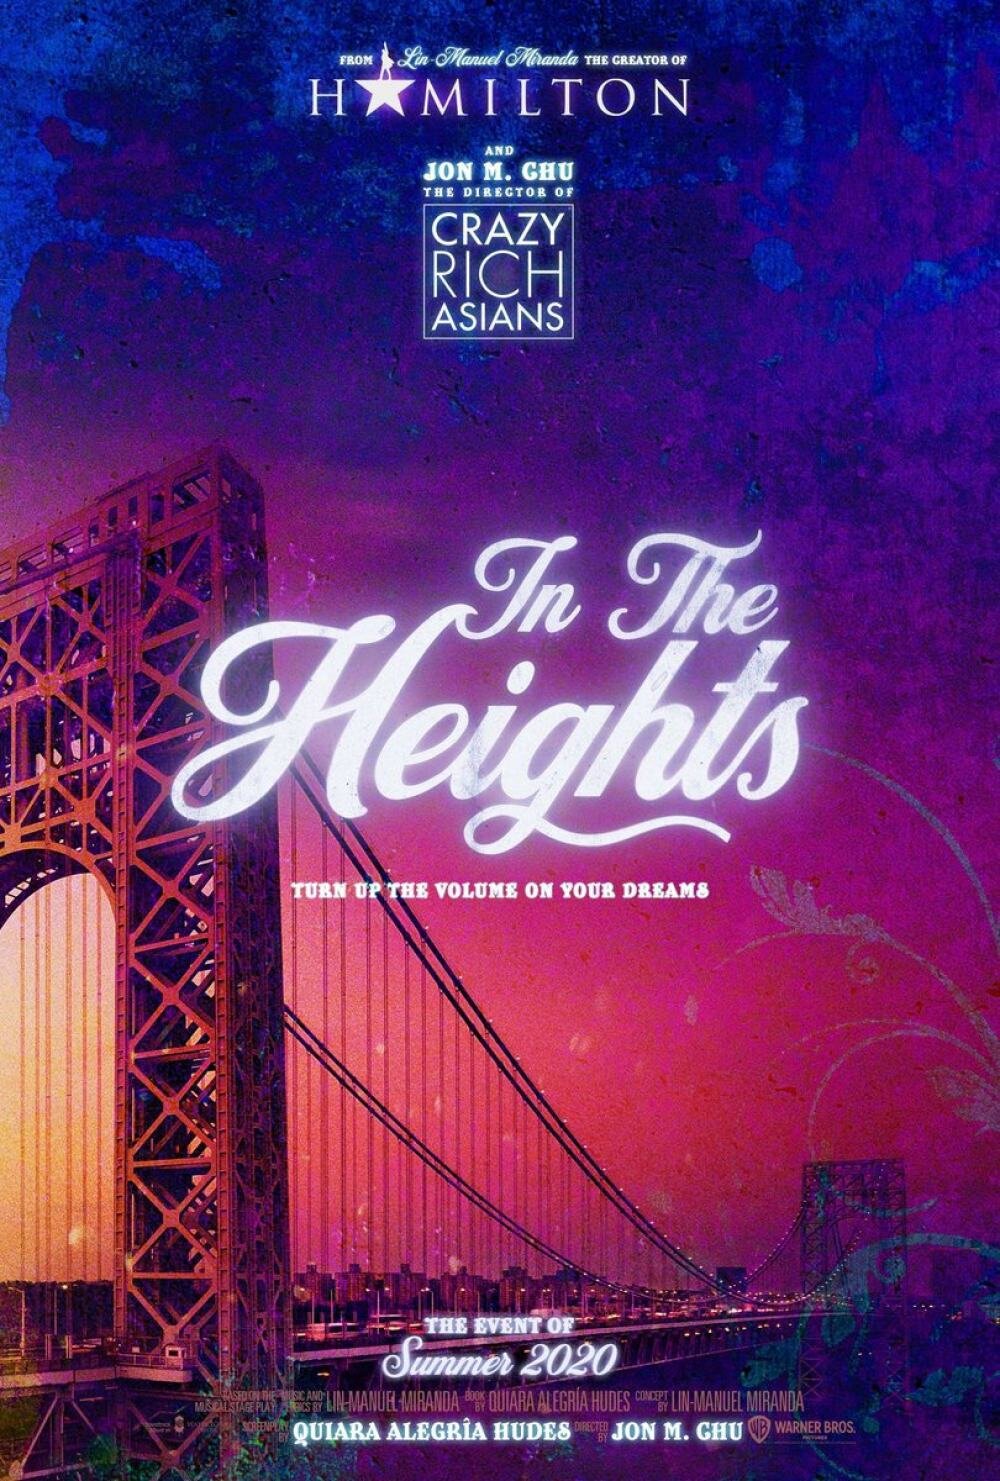 in-the-heights-poster.jpg